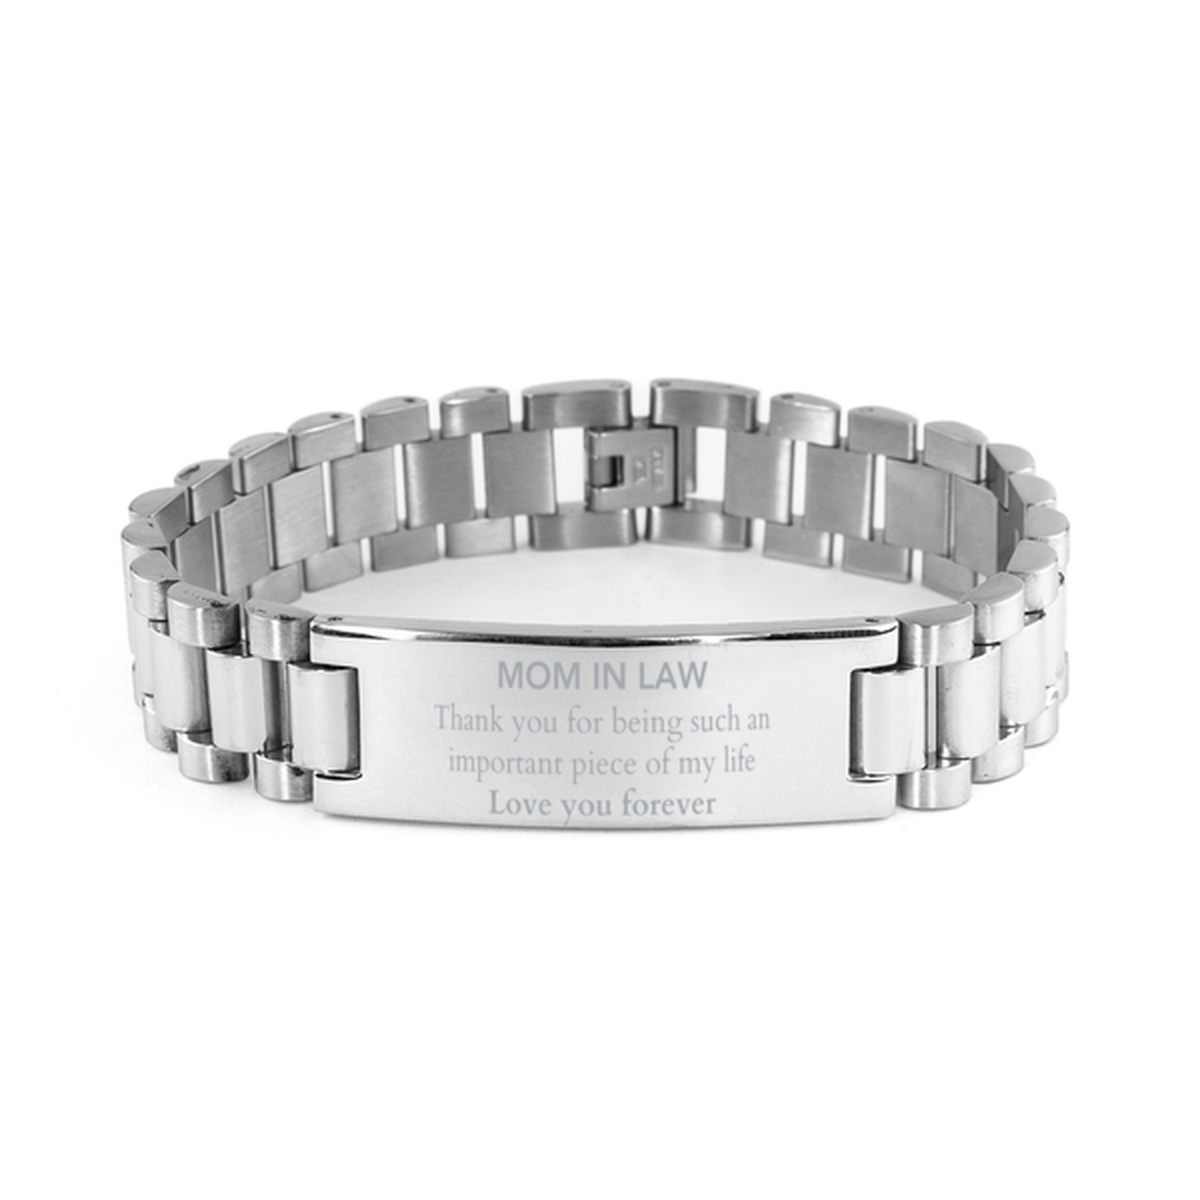 Appropriate Mom In Law Ladder Stainless Steel Bracelet Epic Birthday Gifts for Mom In Law Thank you for being such an important piece of my life Mom In Law Christmas Mothers Fathers Day